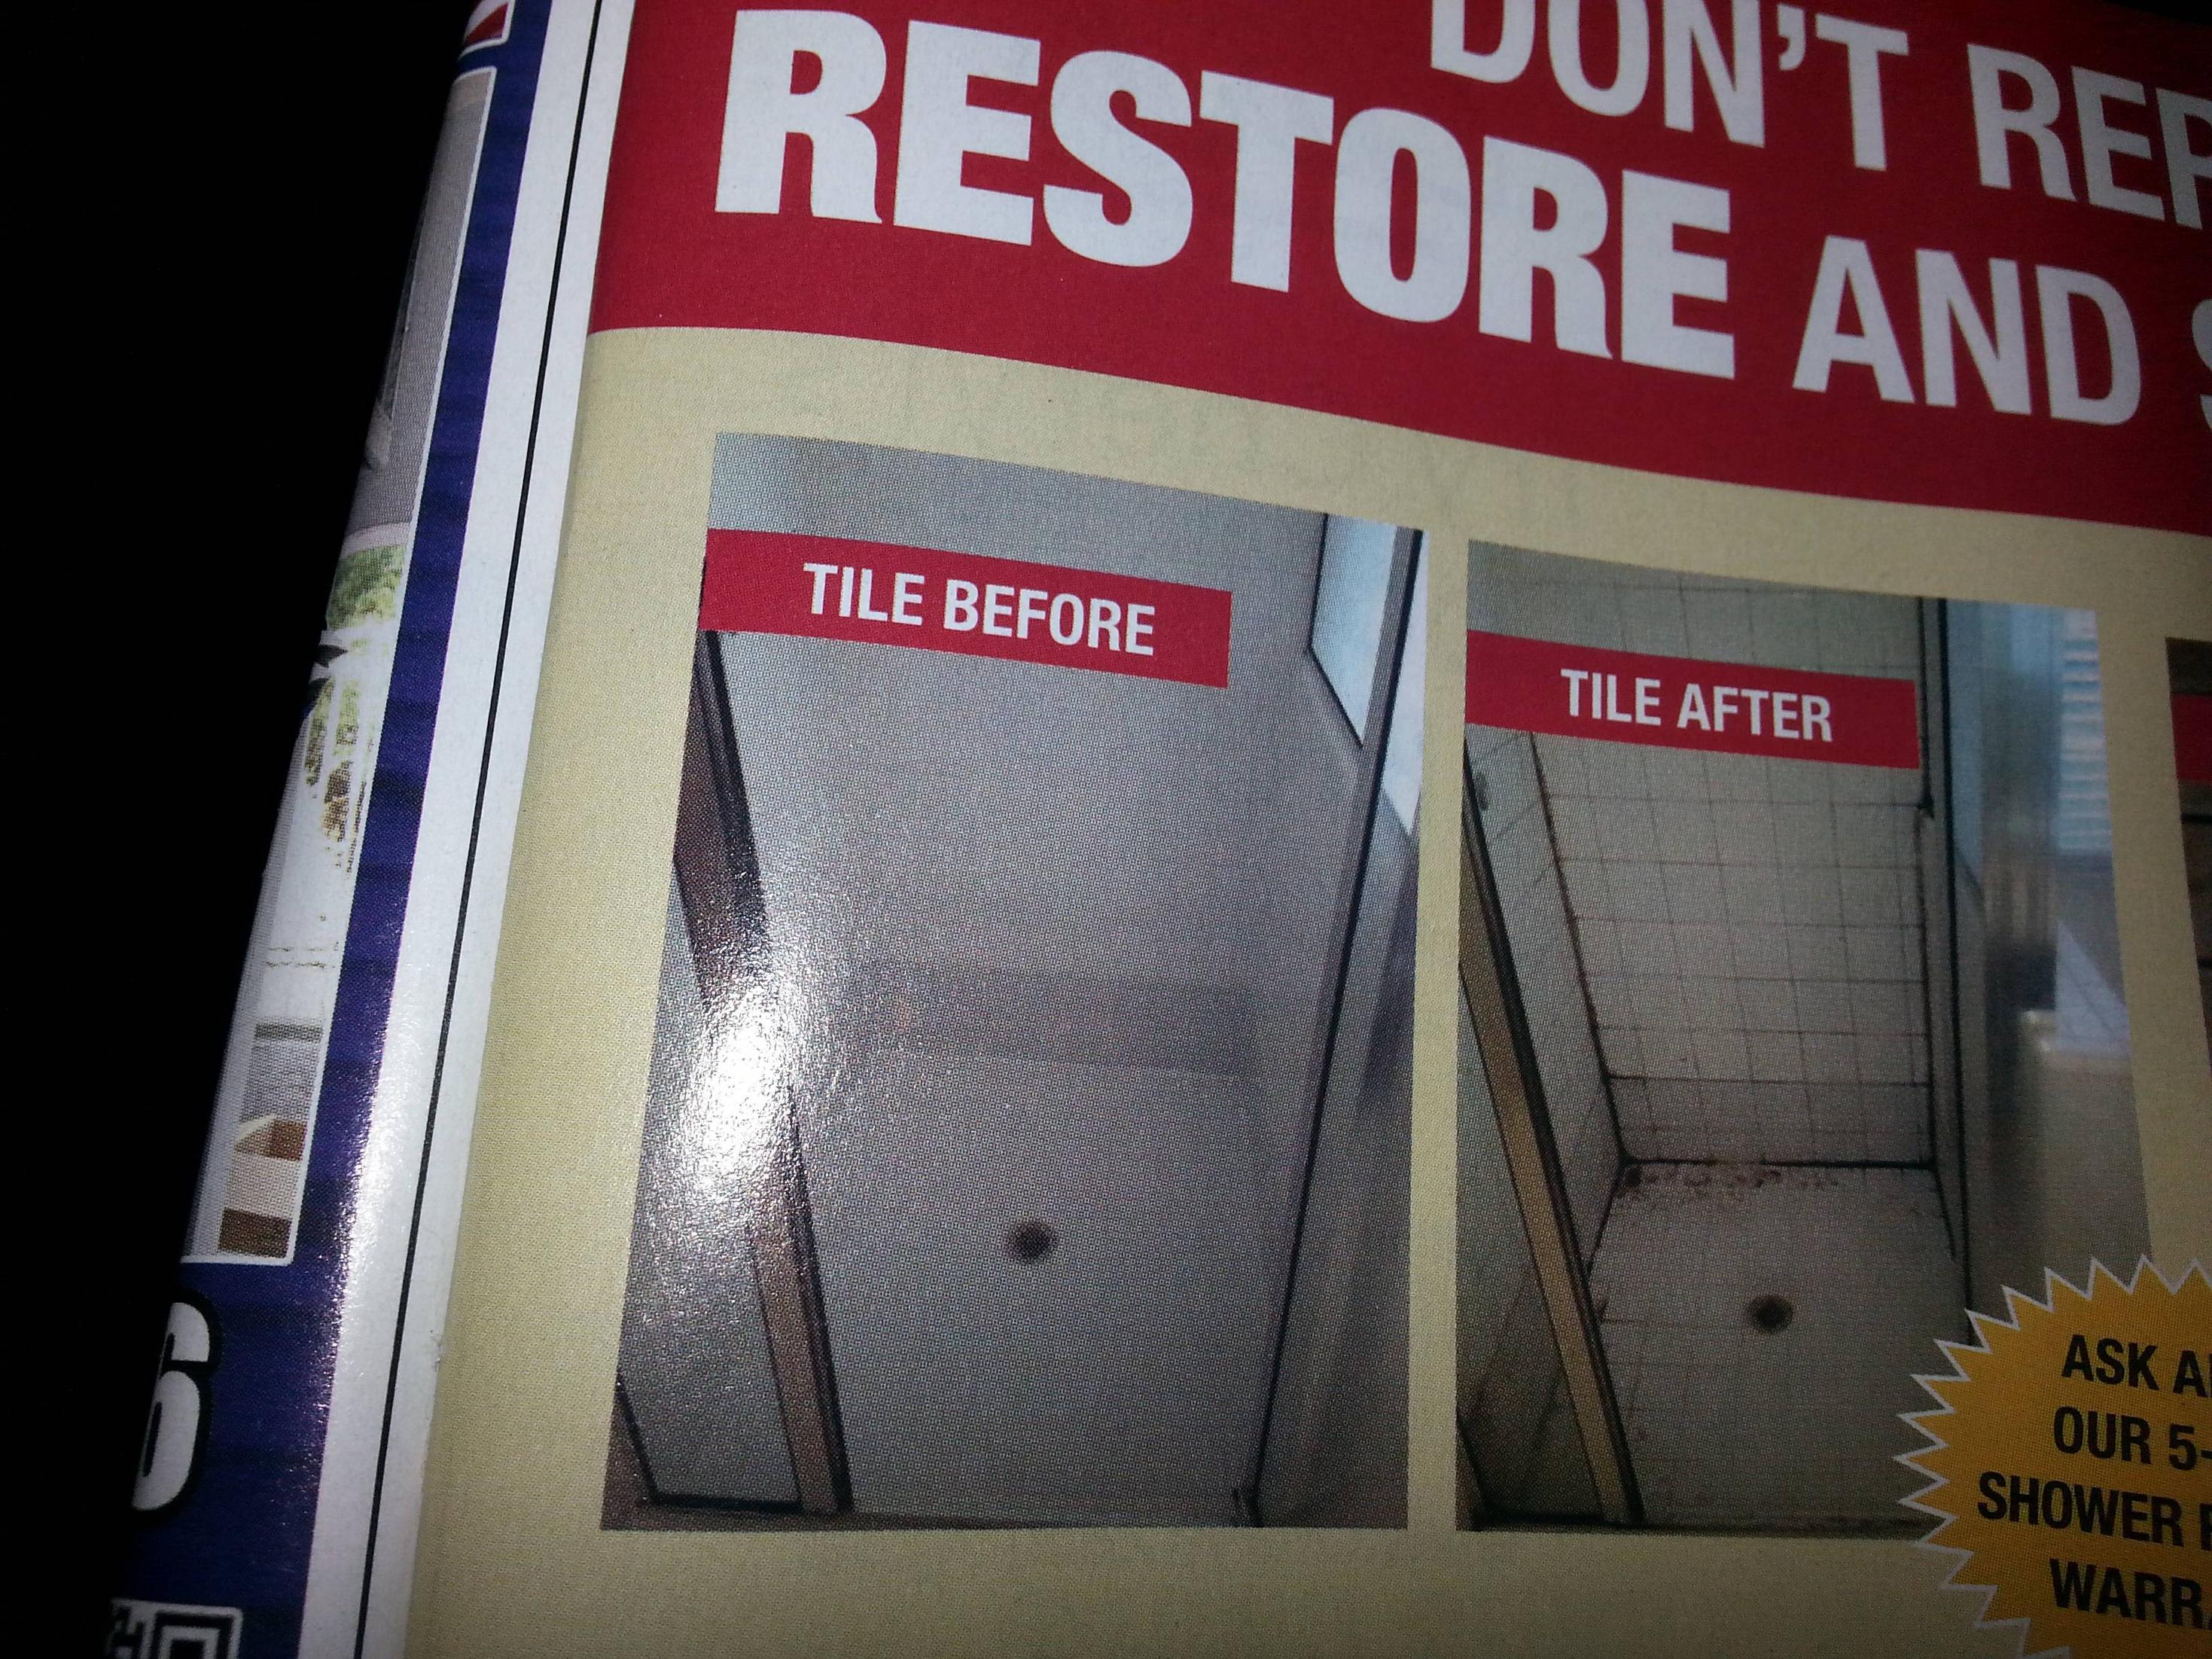 you only had one job - Restore And _DON'T Ref Tile Before Tile After Aska Our 5 Shower Warr